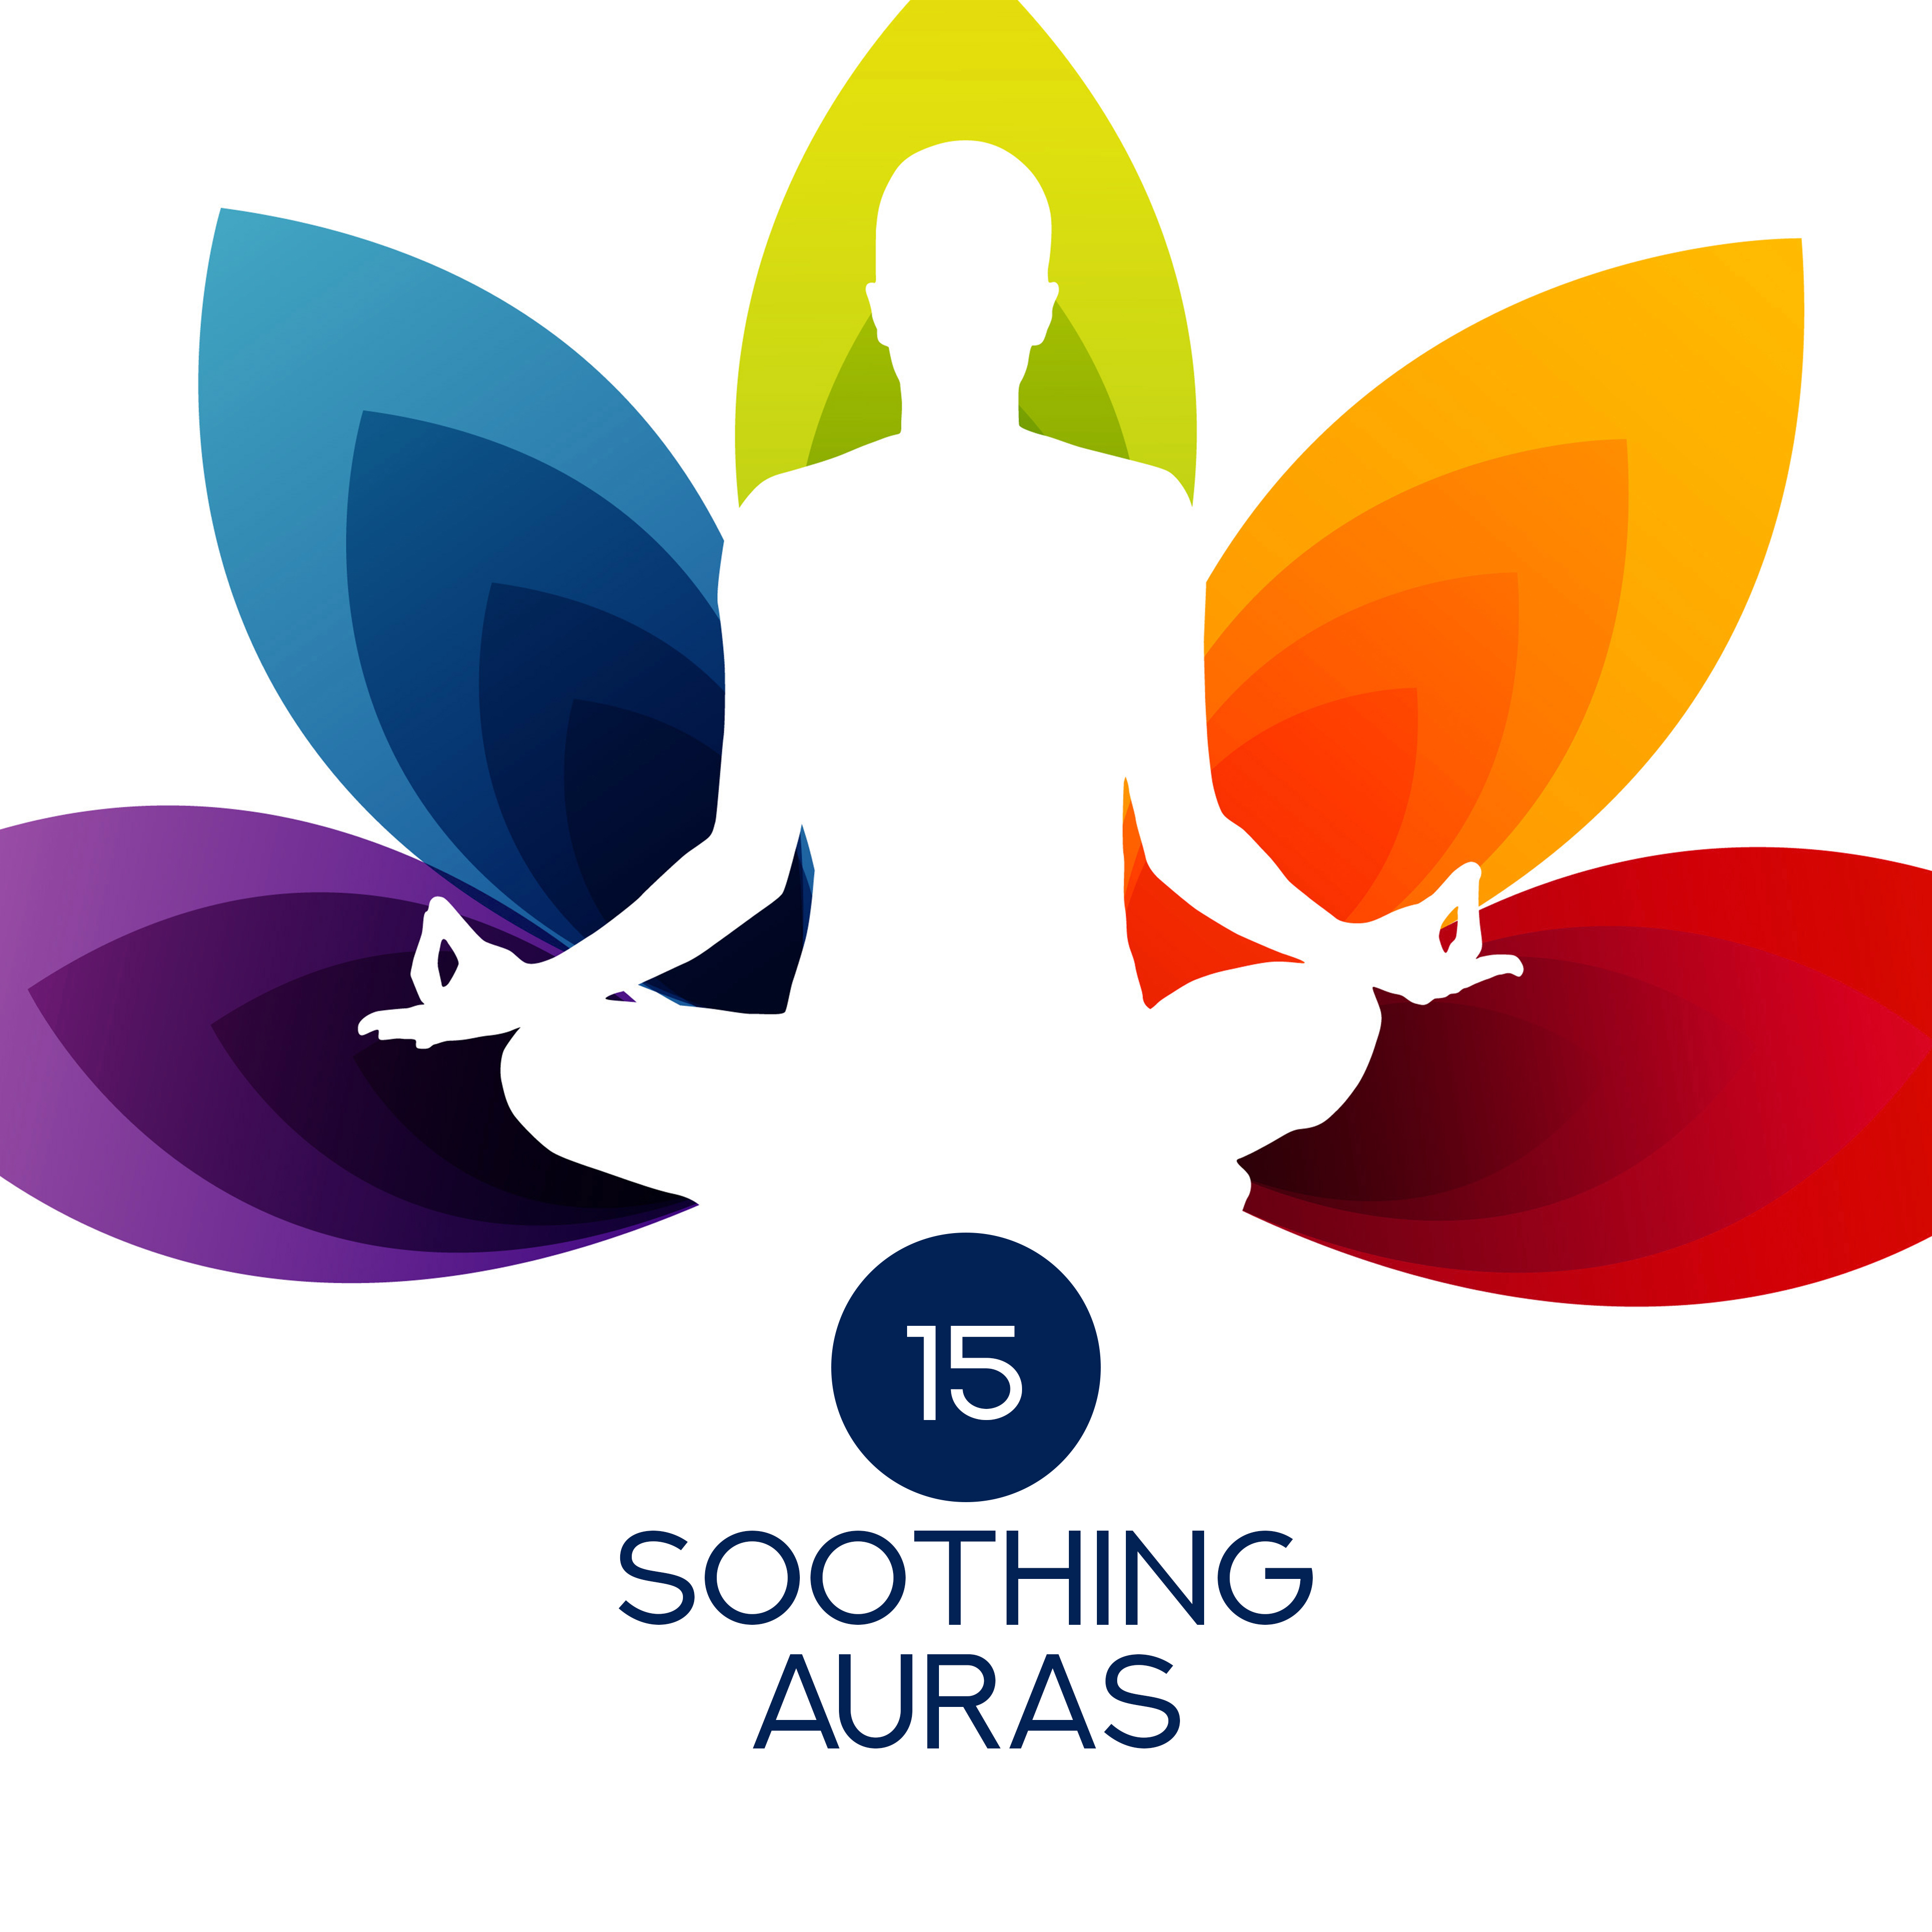 15 Soothing Auras - Total Meditation Awareness, Ambient Yoga, Meditation Music Zone, Calm Songs for Relaxation, Stress Relief, Deep Meditation